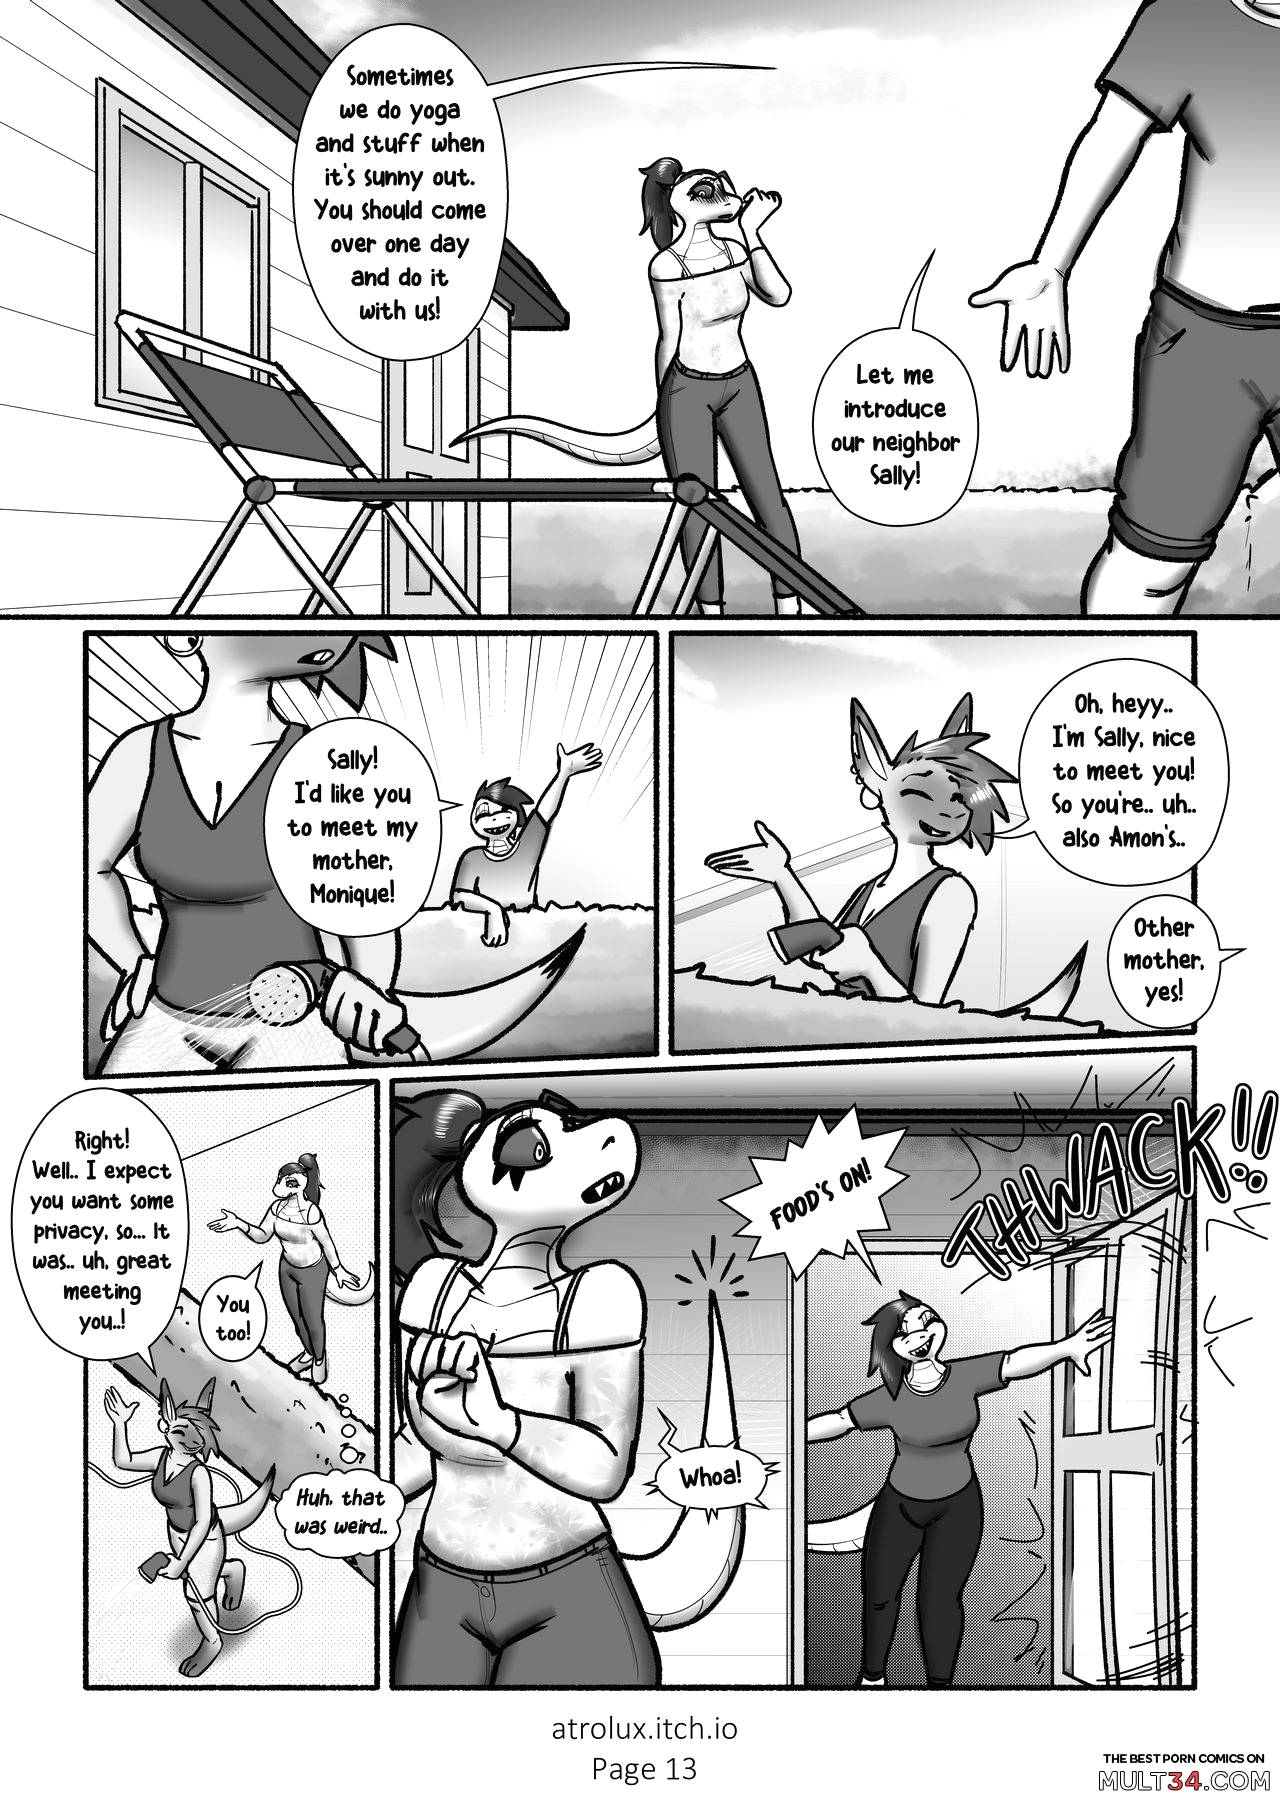 Shedding Inhibitions 6 - Feigned Innocence page 16